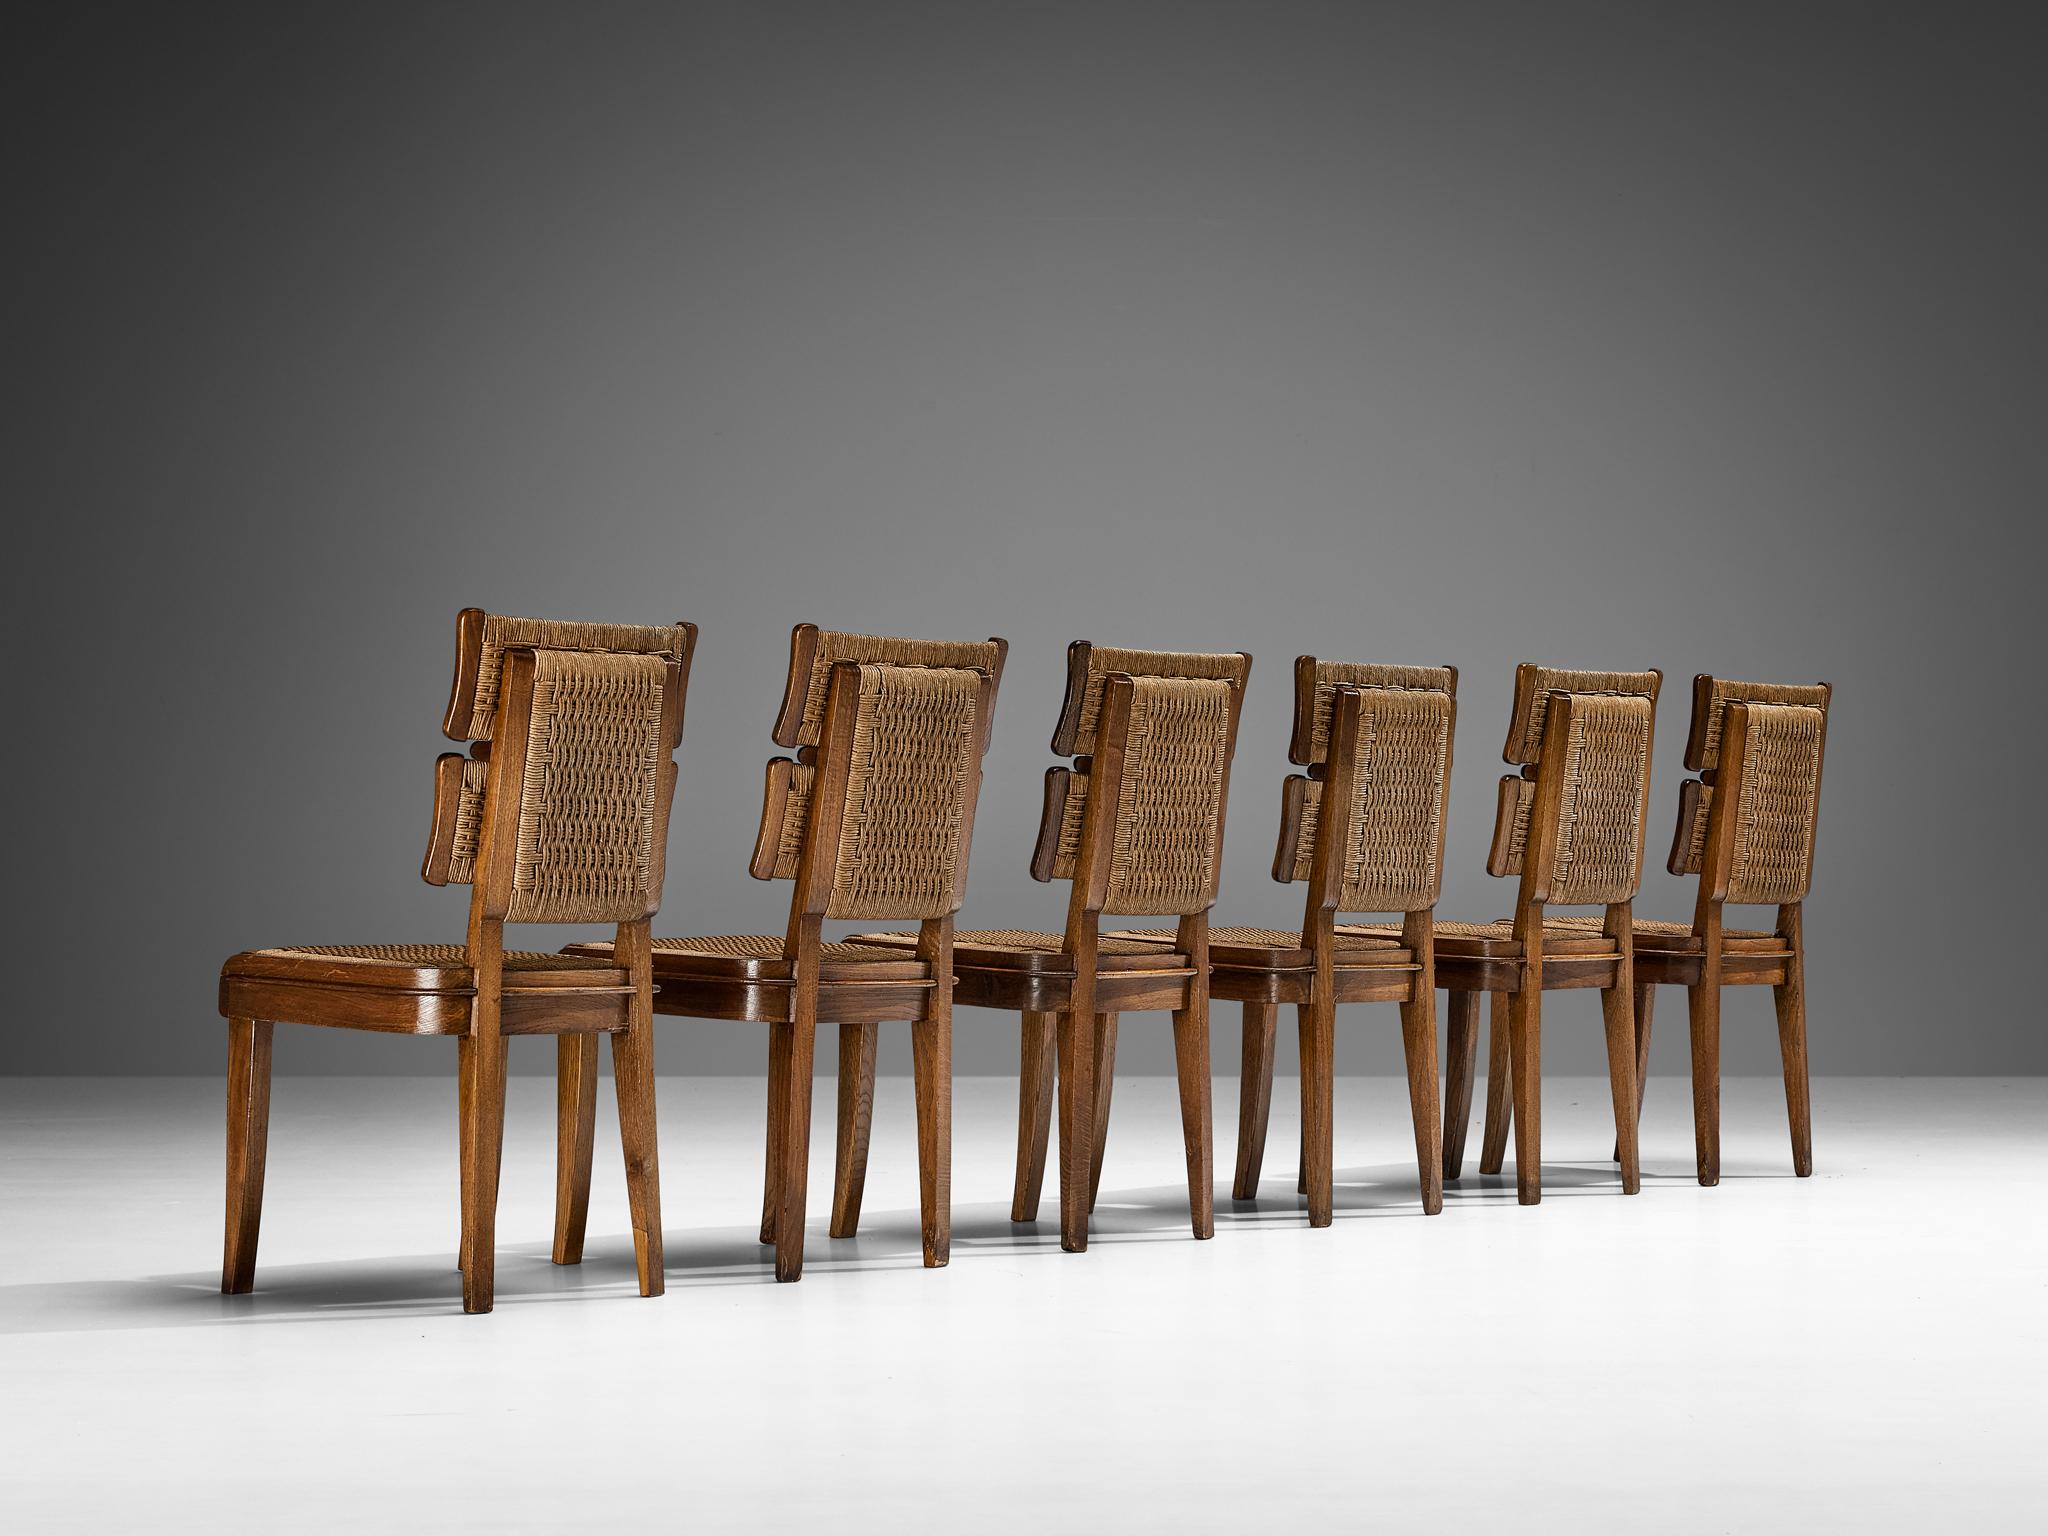 Papercord Unique Italian Set of Six Art Deco Dining Chairs in Oak and Paper Cord